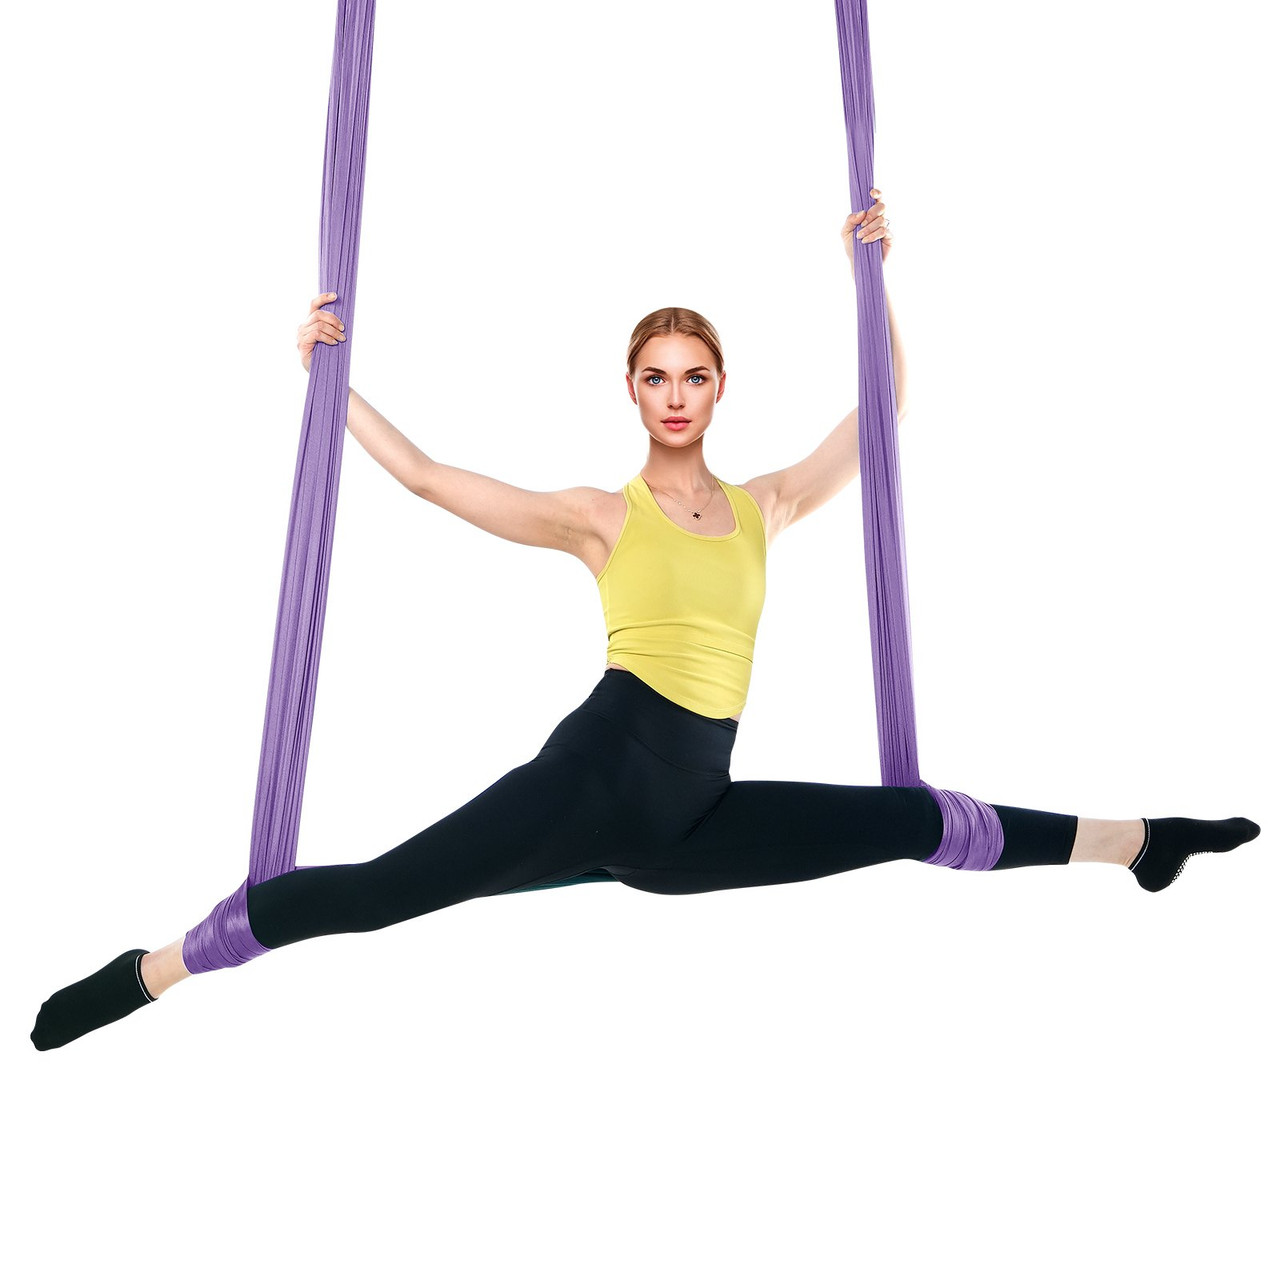 VEVOR Aerial Yoga Hammock & Swing, 4.4 Yards, Yoga Starter Kit with 100gsm Nylon Fabric, Full Rigging Hardware and Easy Set-up Guide, Antigravity Flying for All Levels Fitness Bodybuilding, Purple